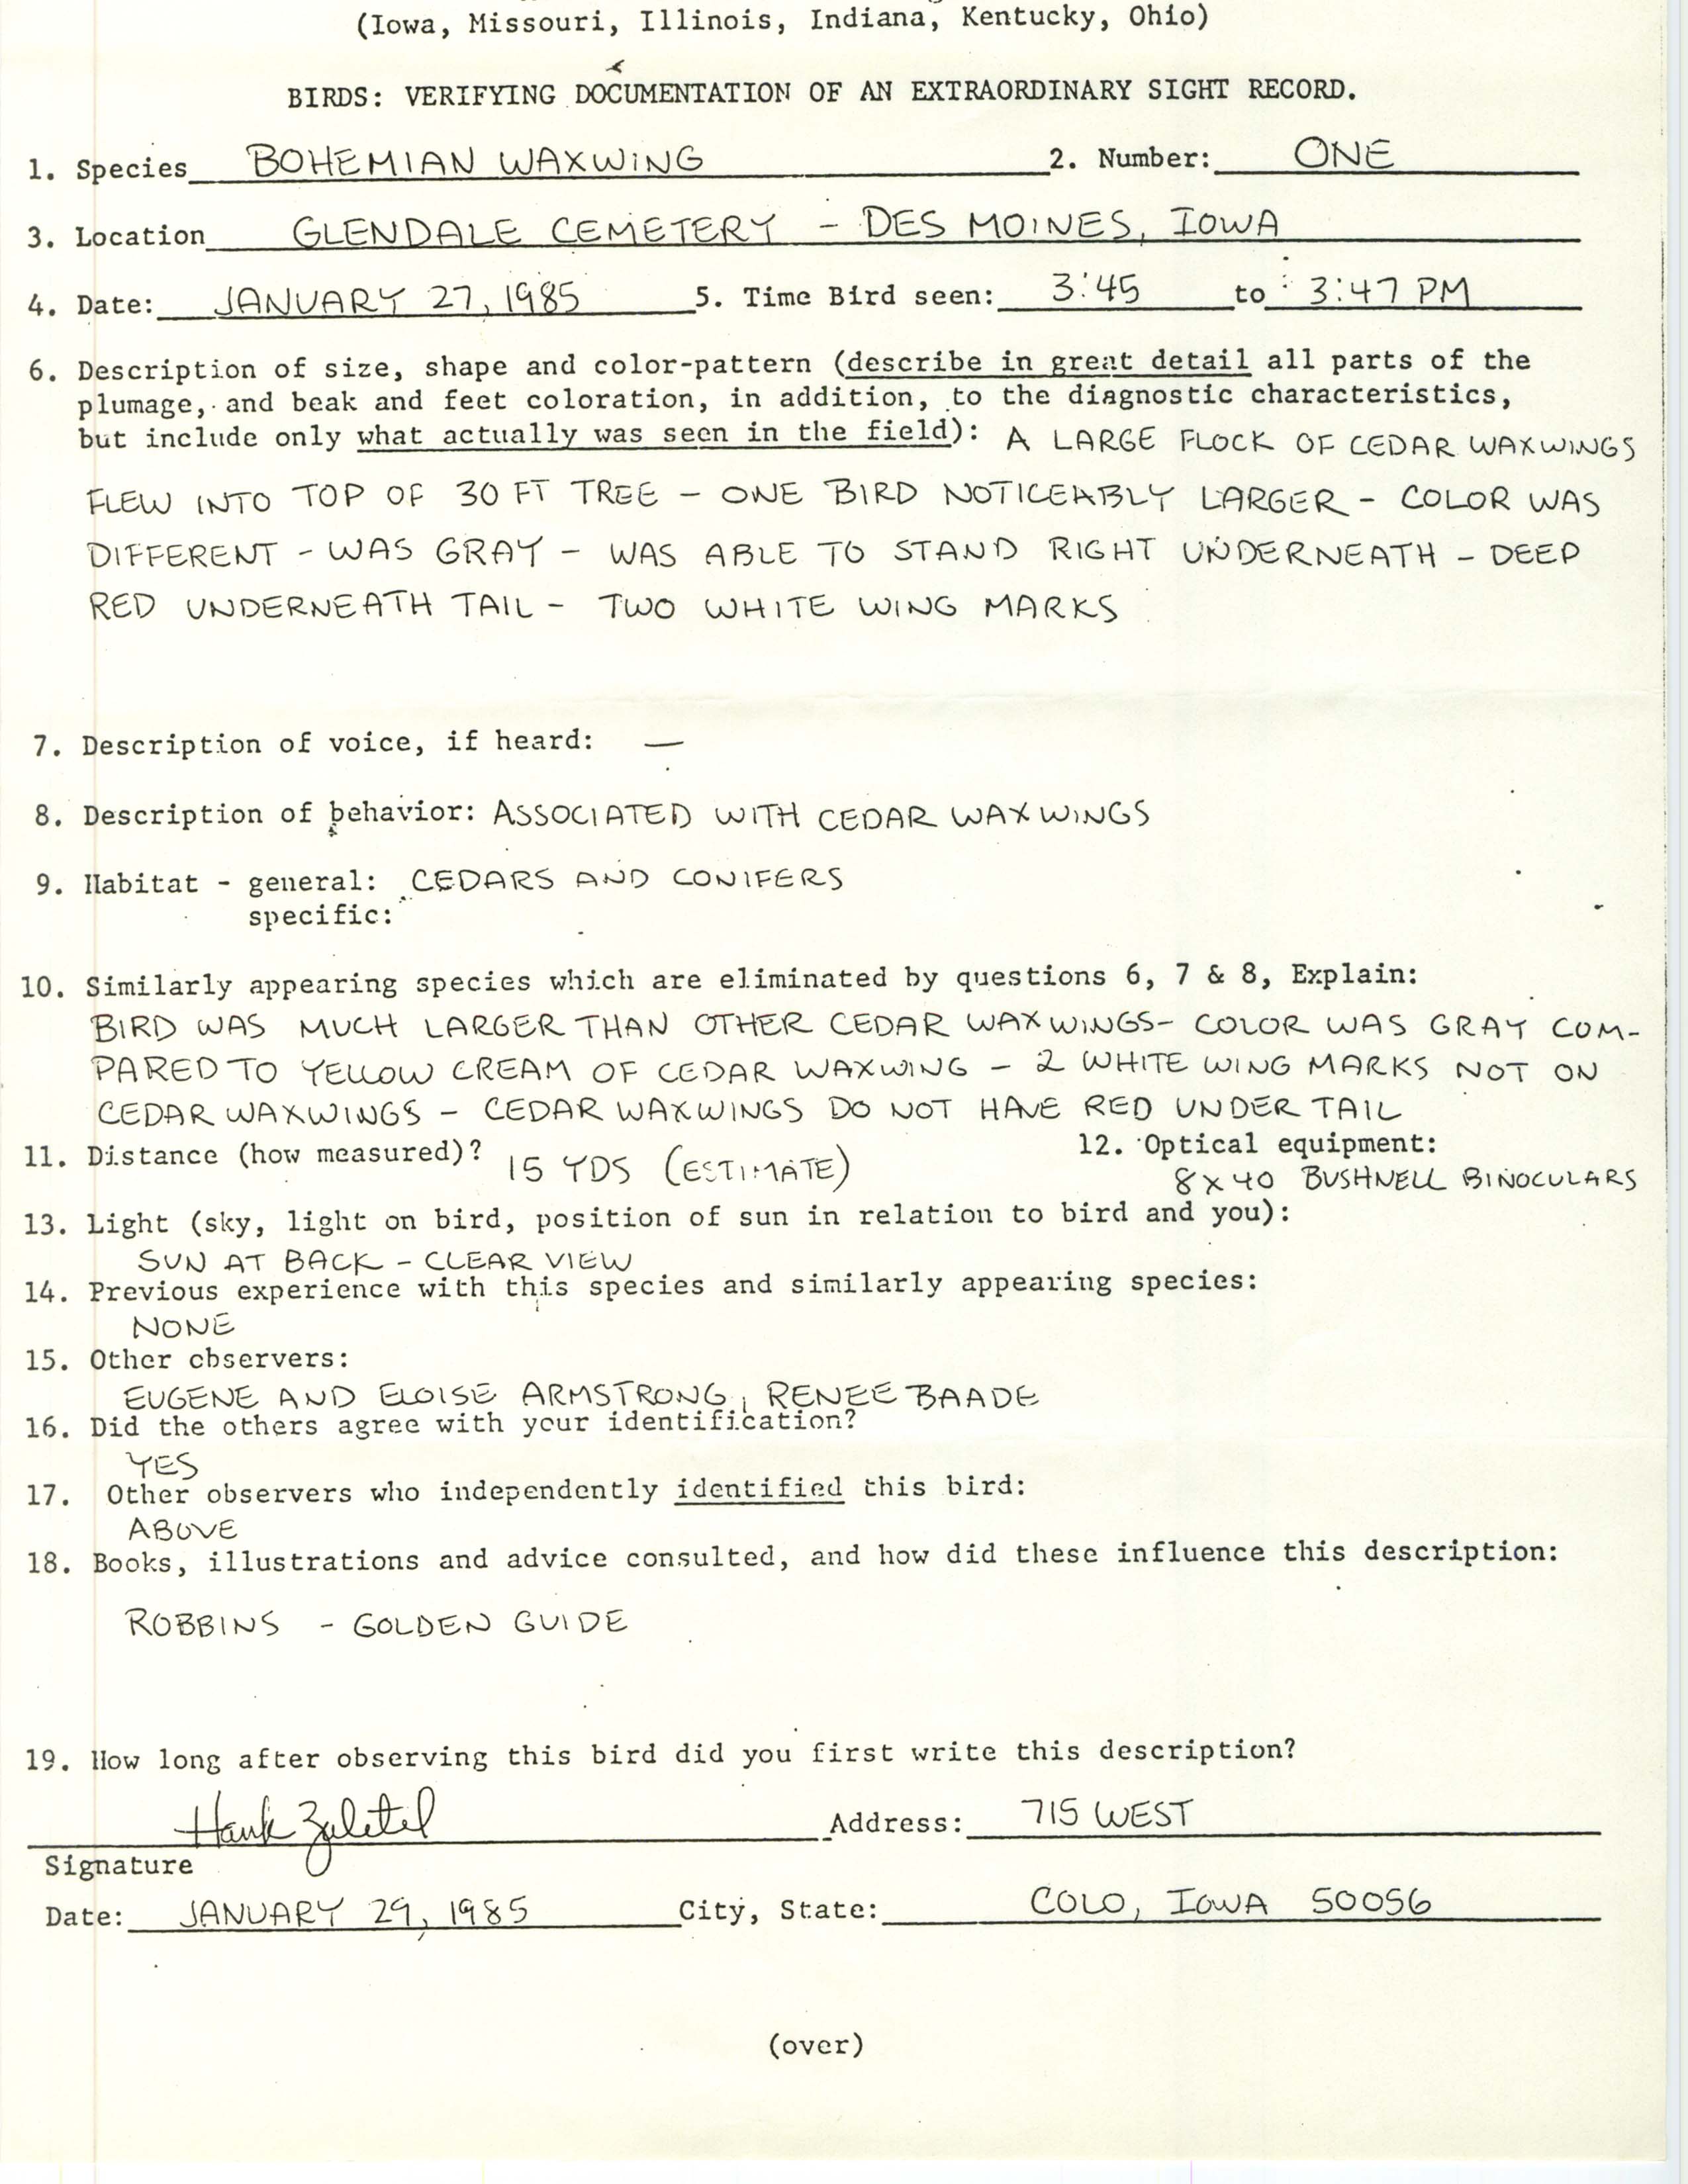 Rare bird documentation form for Bohemian Waxwing at Glendale Cemetery in Des Moines, 1985